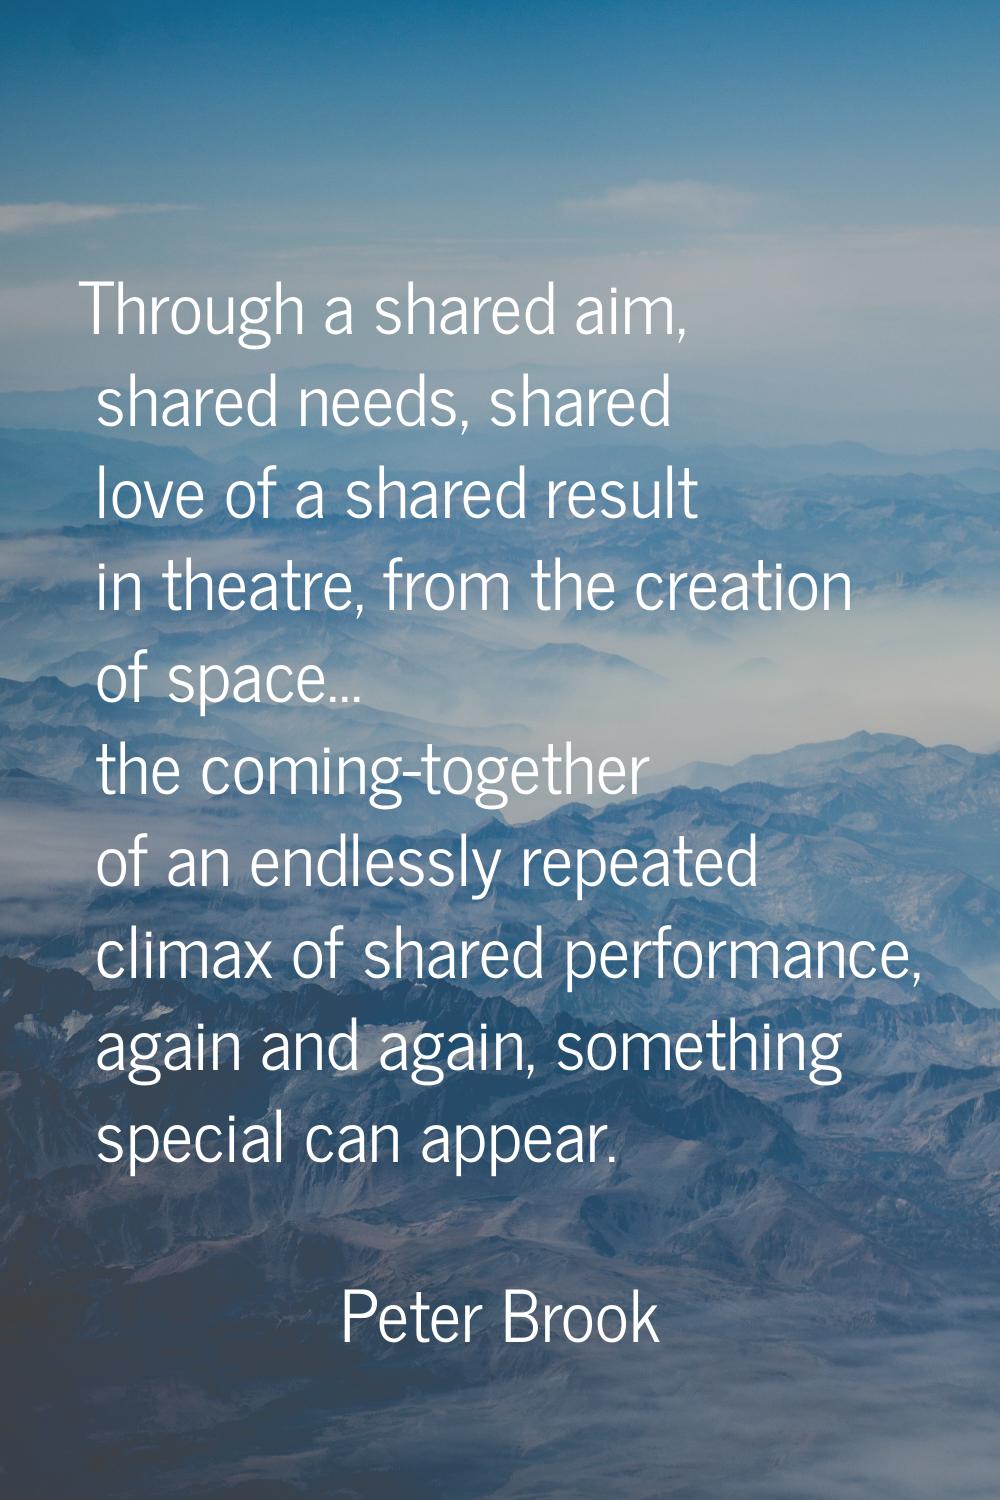 Through a shared aim, shared needs, shared love of a shared result in theatre, from the creation of